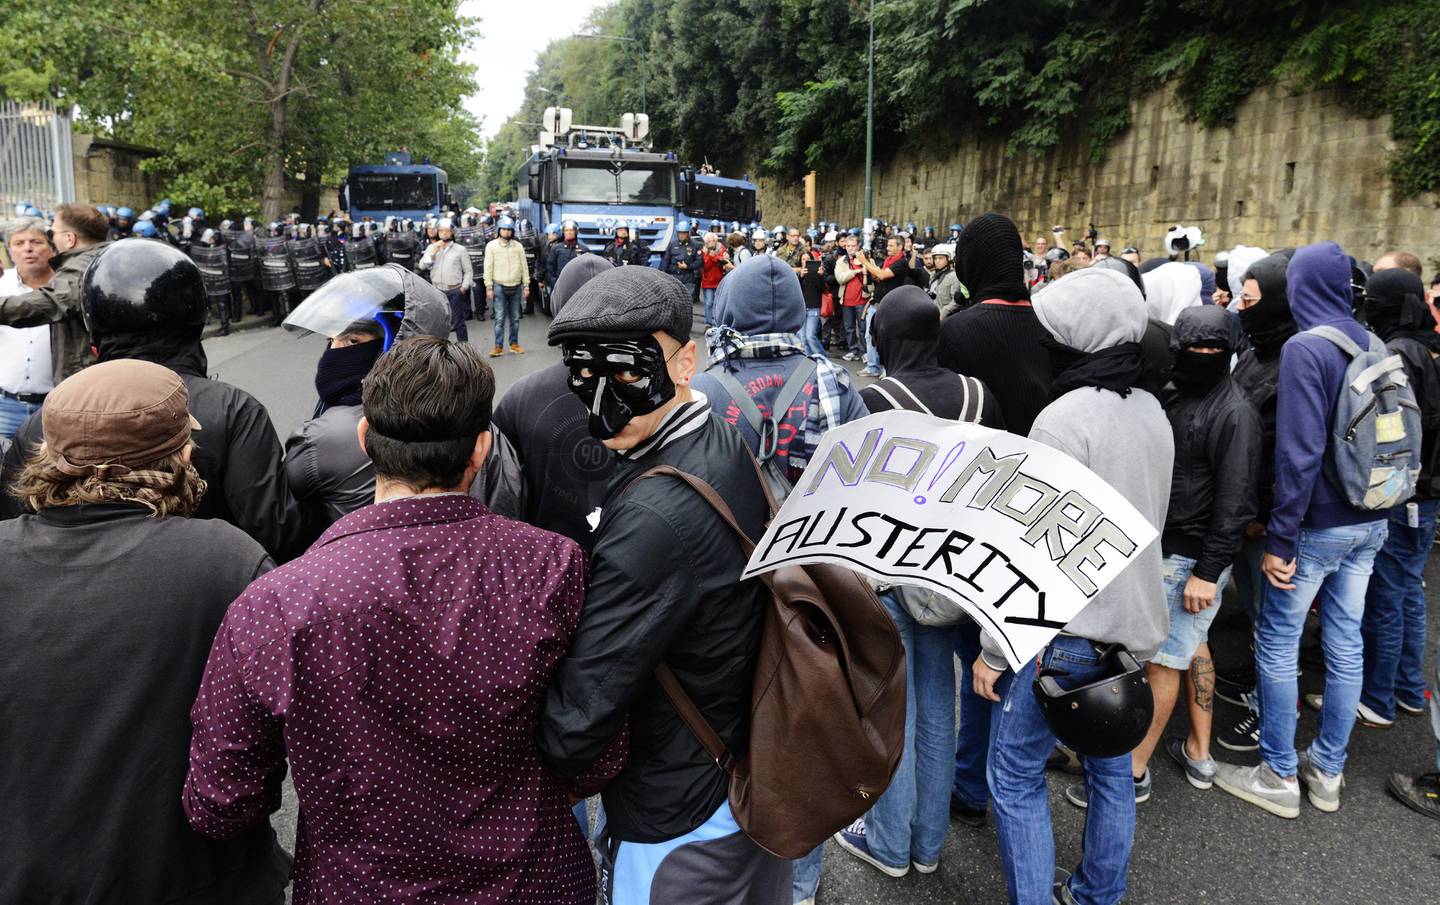 Demonstrators face police as the ECB governing council meets in Naples, Italy, Thursday, Oct. 2, 2014. European Central Bank head Mario Draghi is expected Thursday to underline the bank's willingness to deploy more economic stimulus measures, a stance that could send the euro skidding even lower. And a drop in the currency ó which helps eurozone exporters and could nudge up worryingly low inflation ó might be the most effective stimulus to come out of the ECB's monthly meeting. police squared off against more than 3,000 demonstrators in Naples, where the council held its monthly meeting, one of two held annually away from its headquarters in Frankfurt, Germany. Riot police used water cannons to break up protesters carrying banners against government austerity policies and unemployment. (AP Photo/Salvatore Laporta) / TT / kod 436